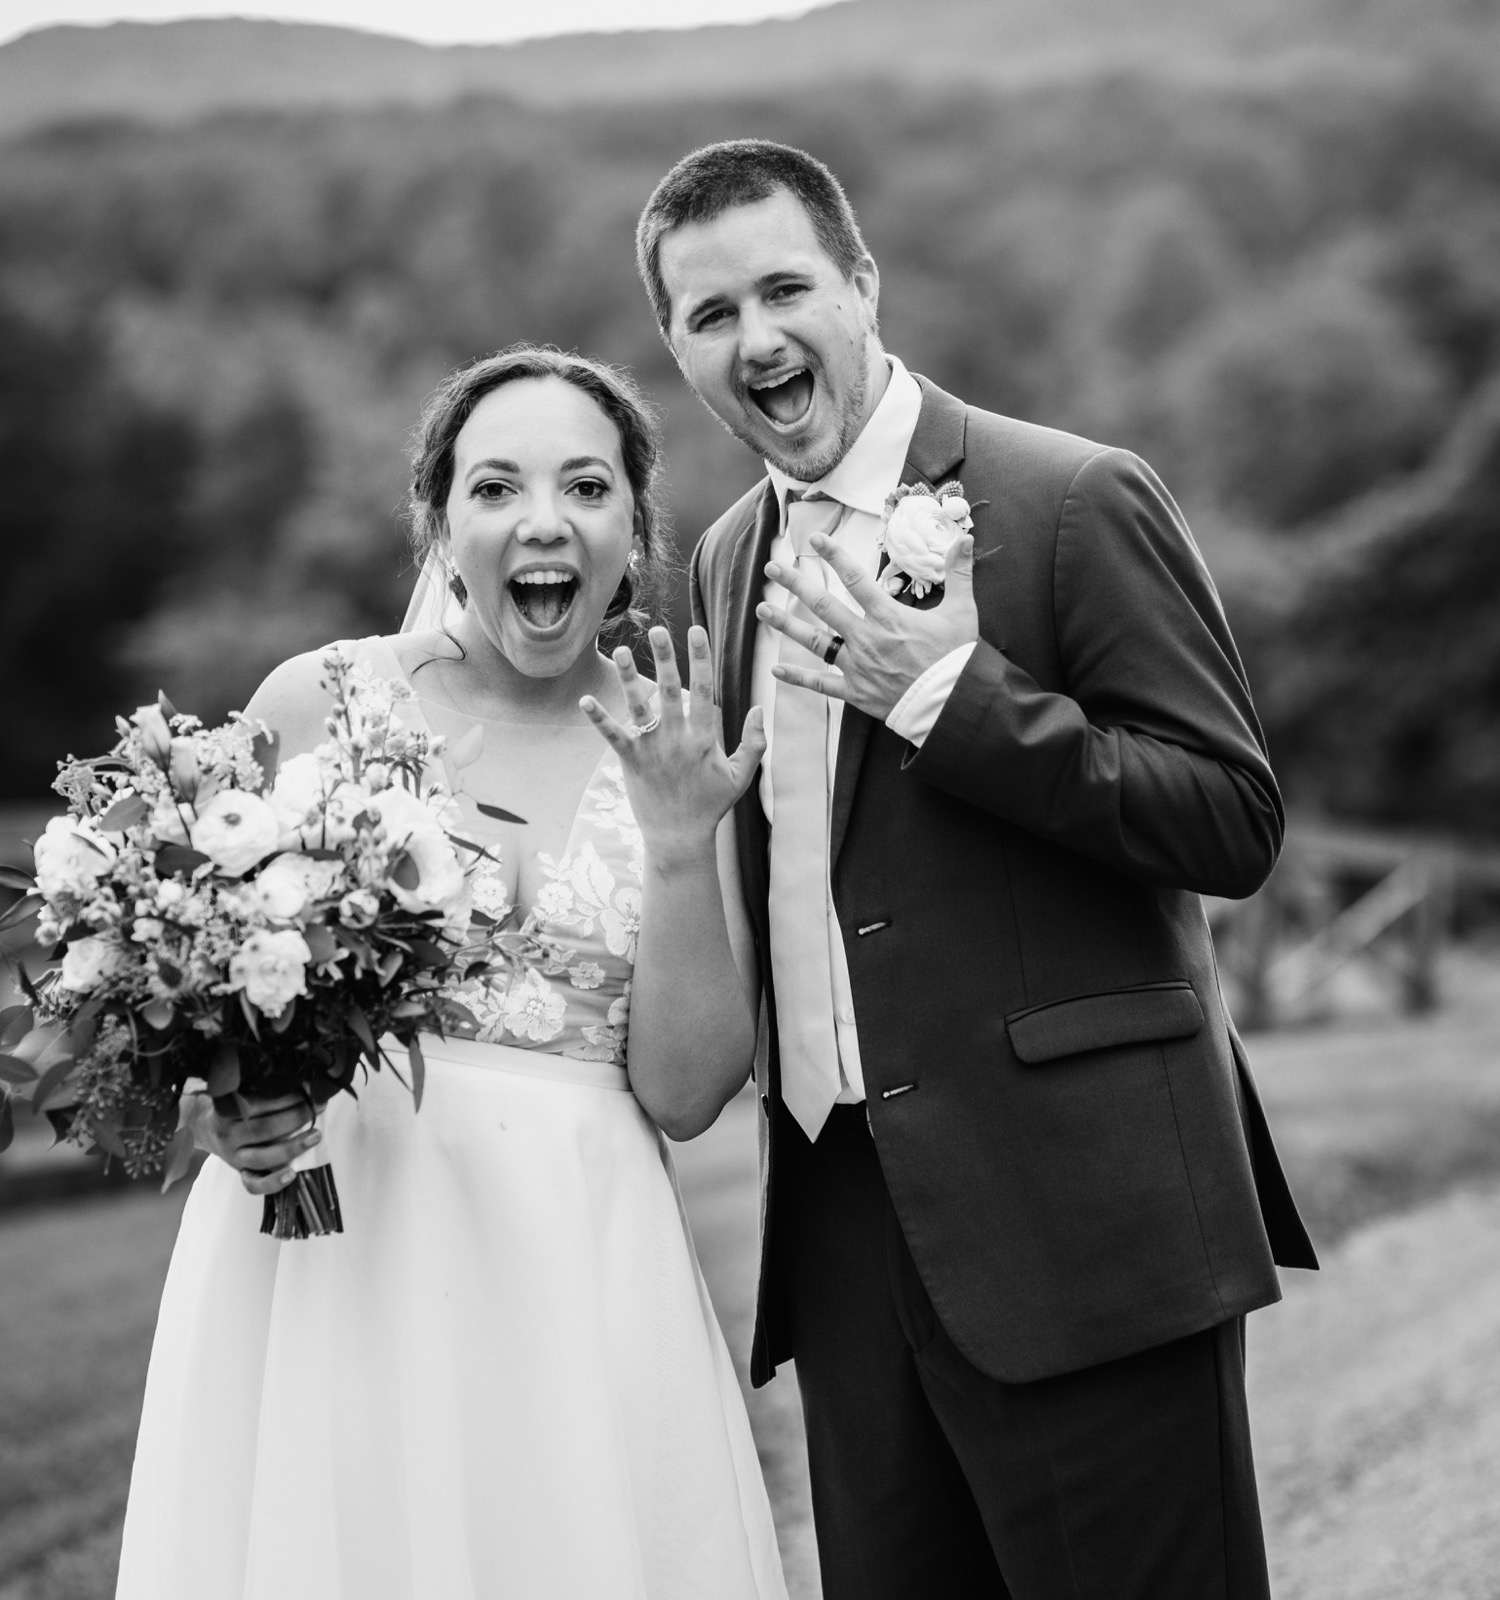 Bride and groom celebrate their wedding day at James Monroe's Highland in Charlottesville, VA